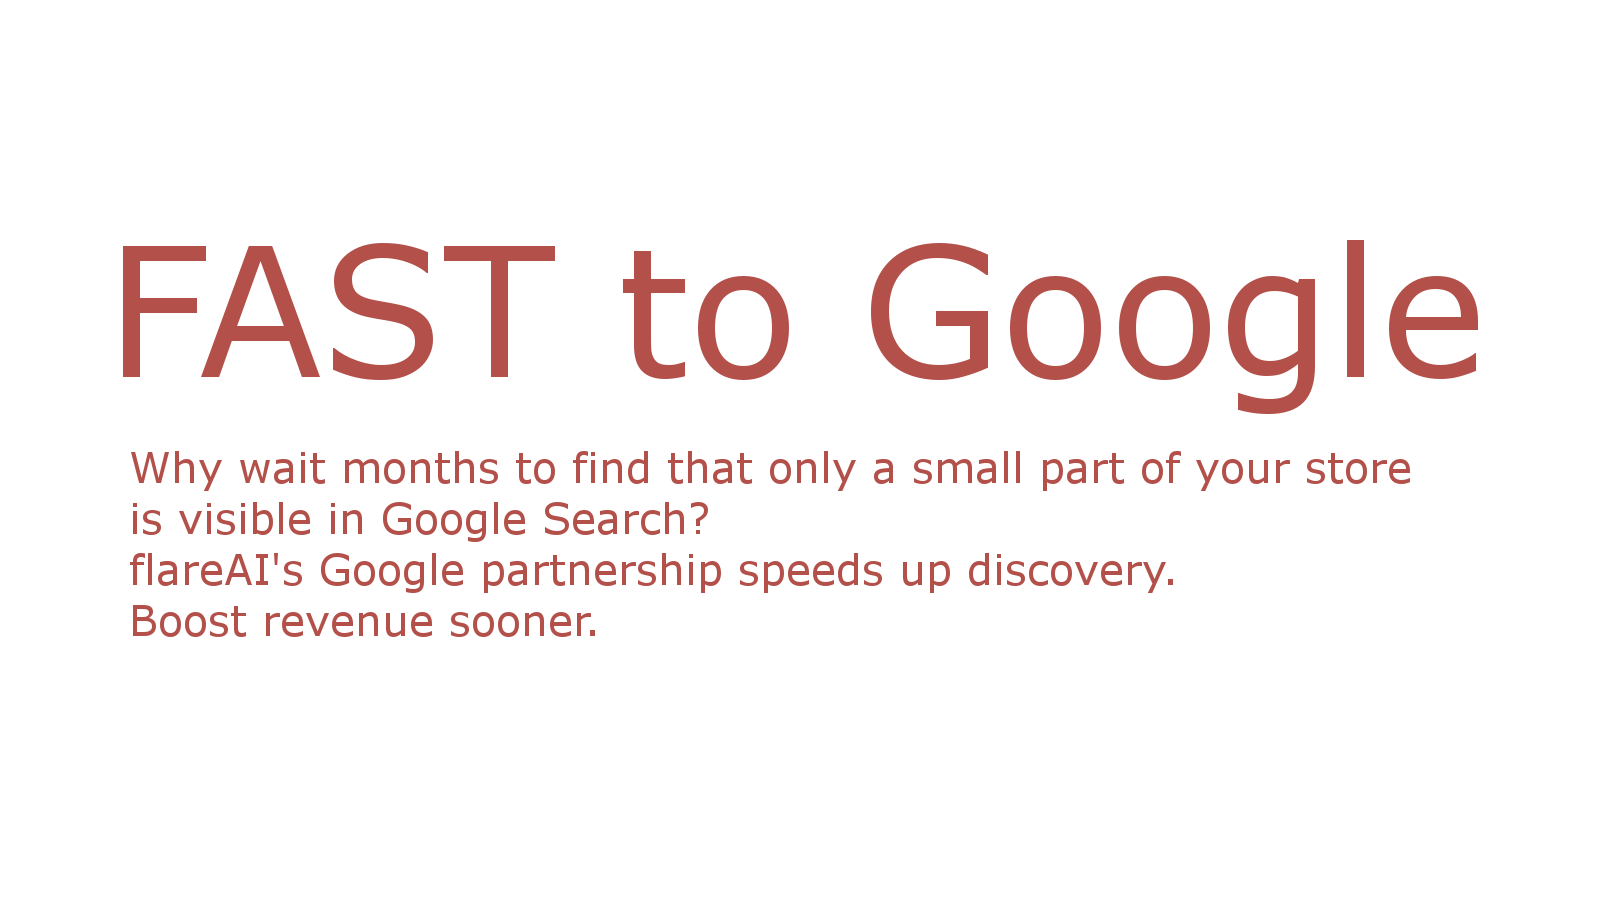 Faster Discovery on Google Search Index